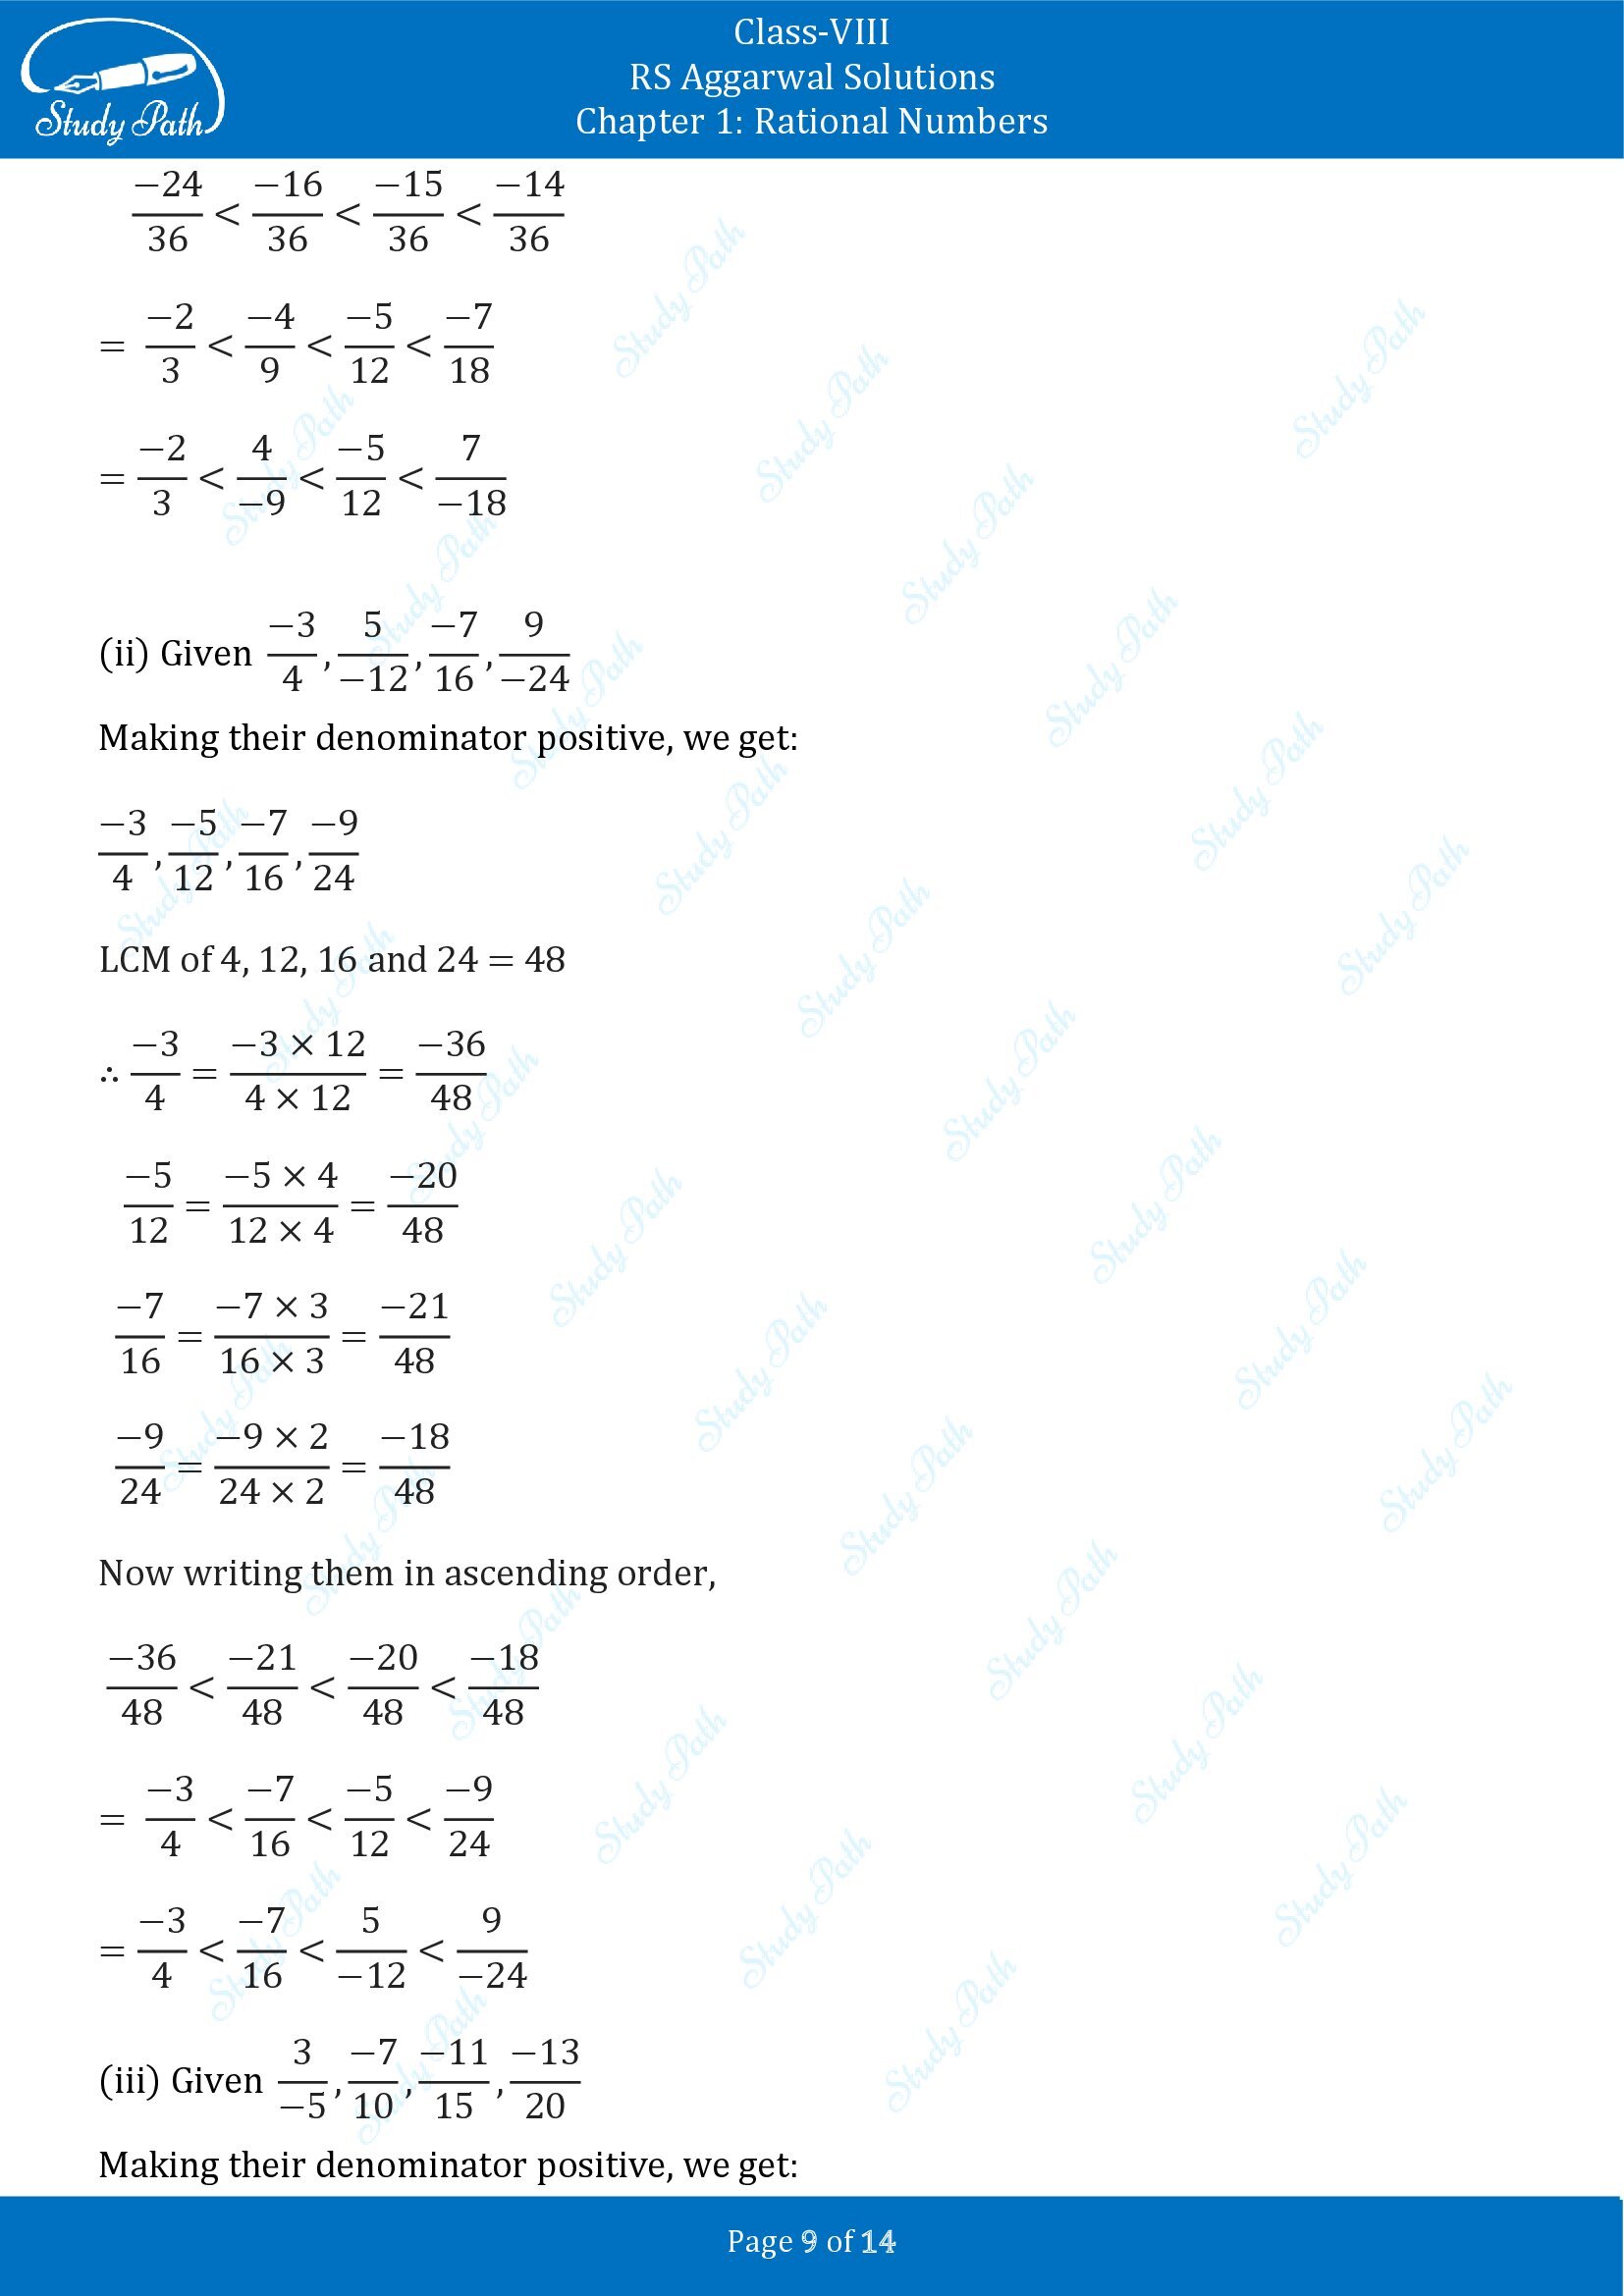 RS Aggarwal Solutions Class 8 Chapter 1 Rational Numbers Exercise 1A 00009